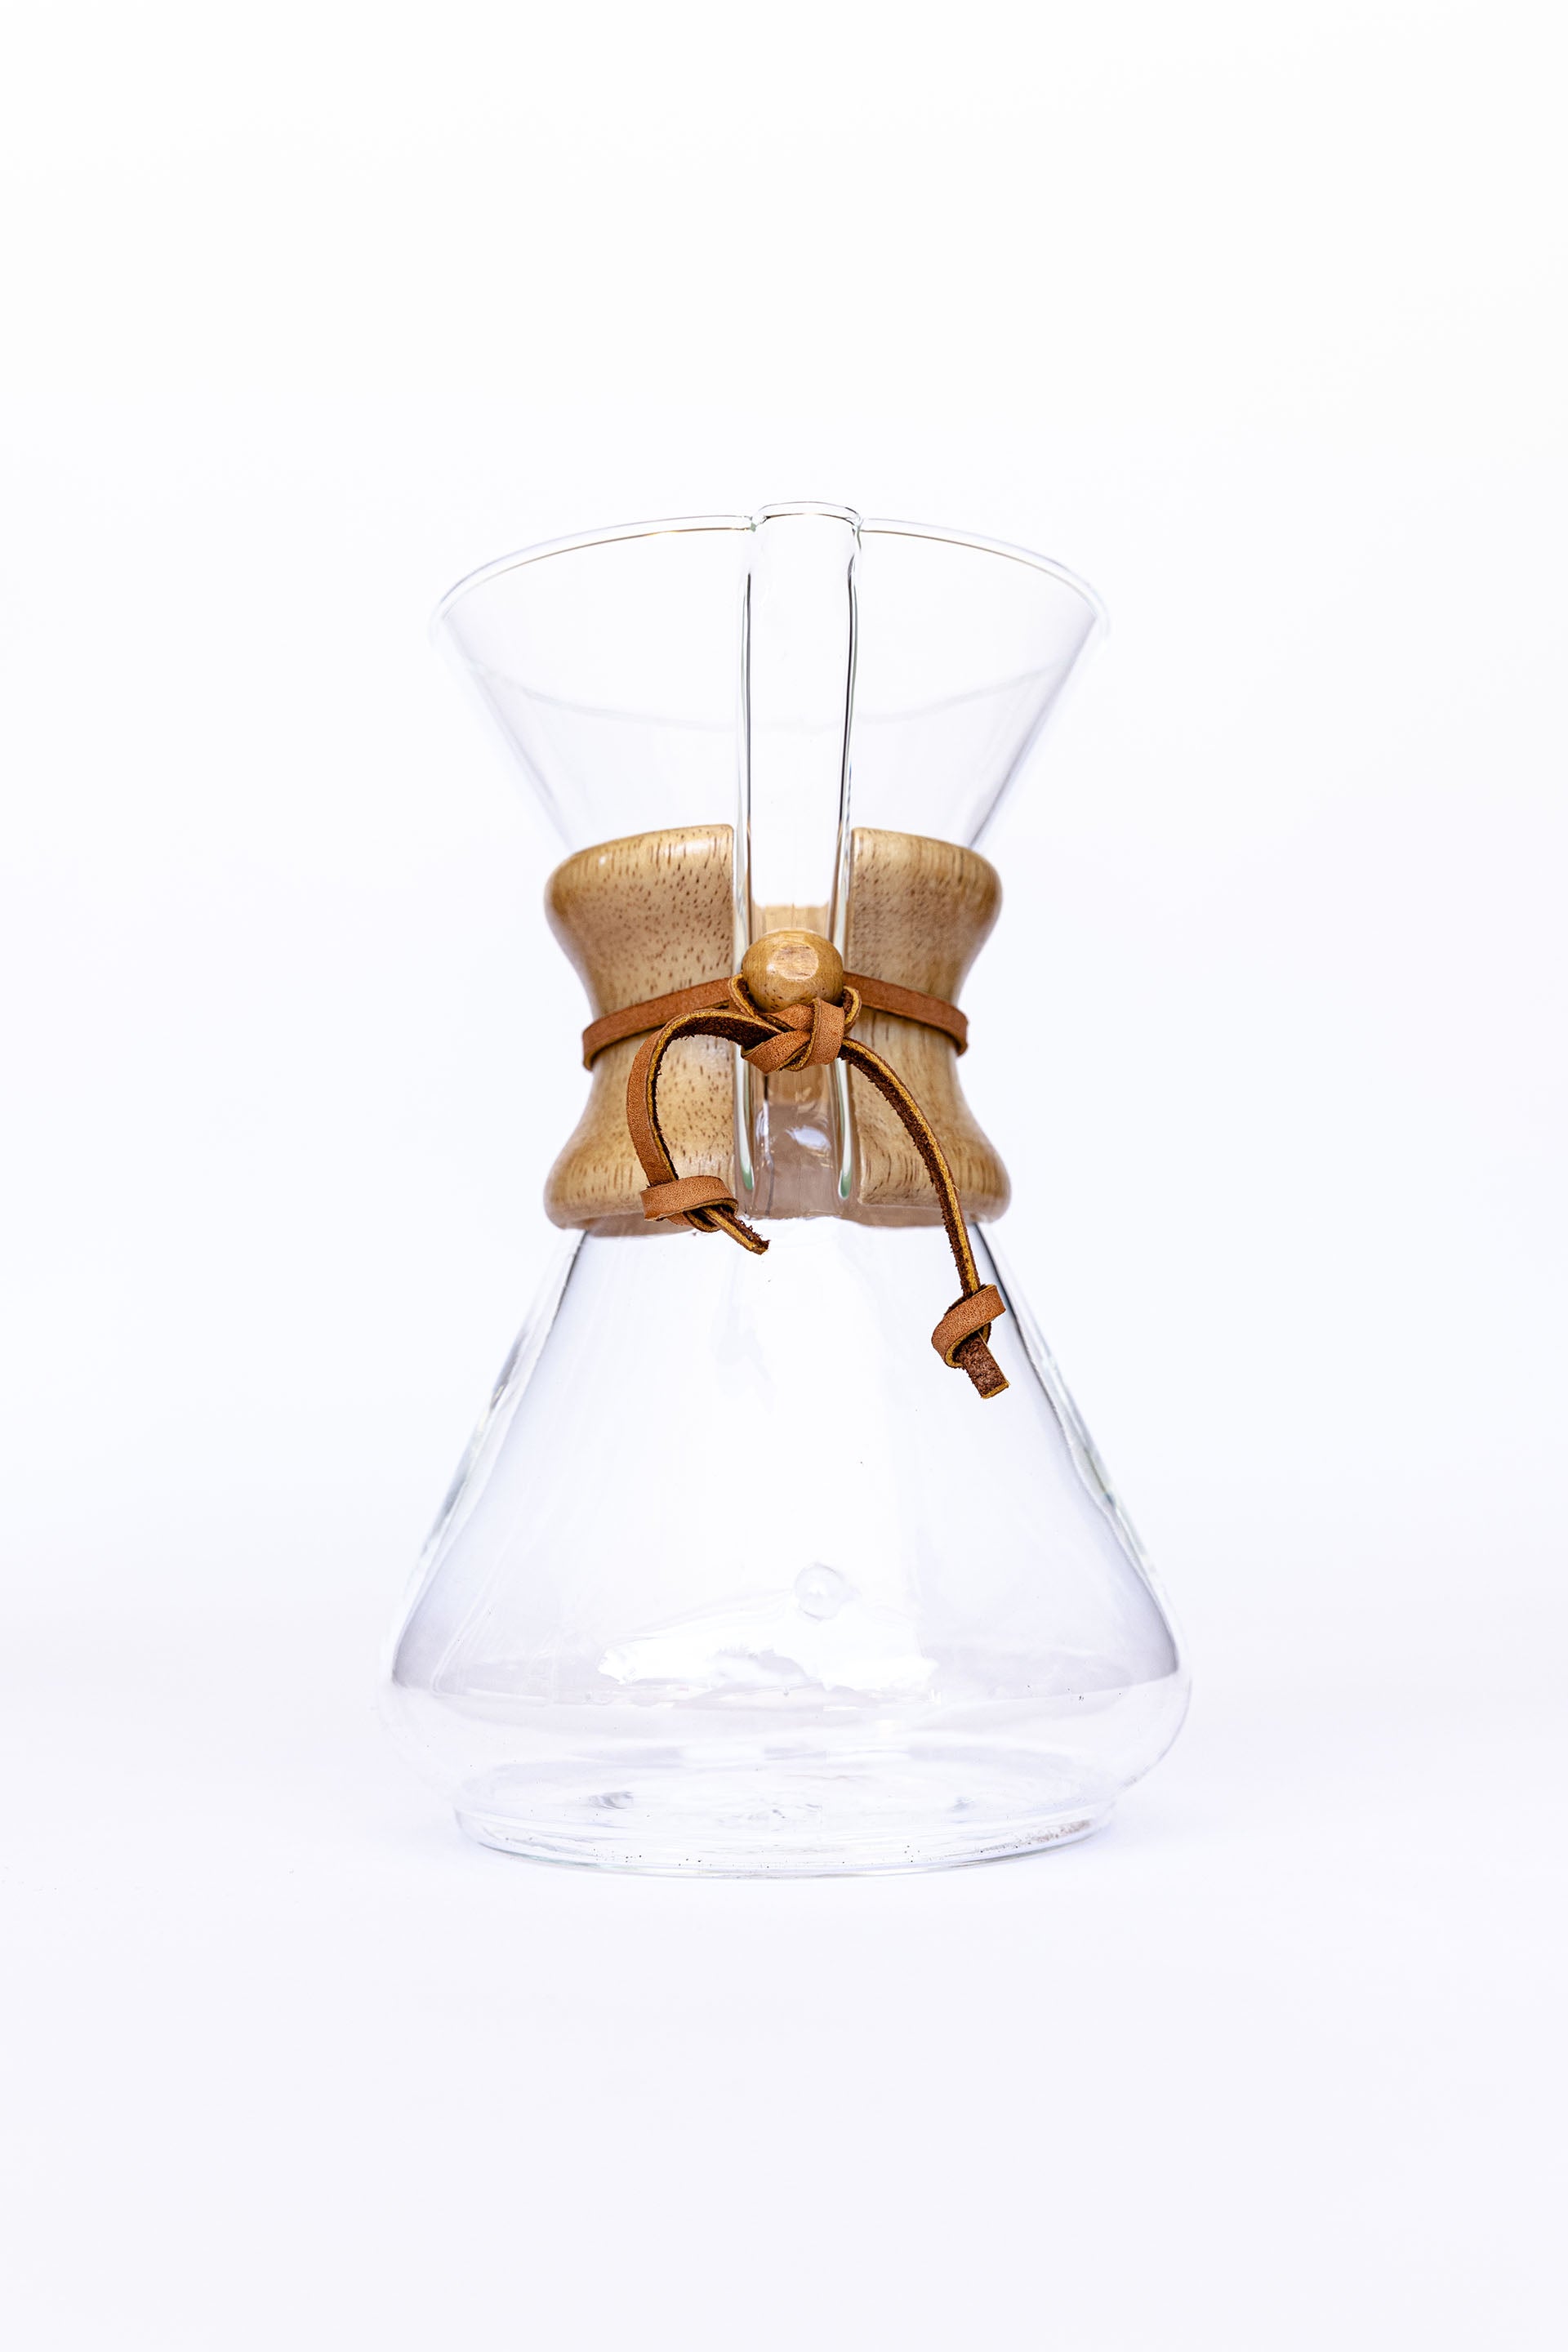 Chemex 6-Cup Glass Pour-Over Coffee Maker with Dark Wood Collar +